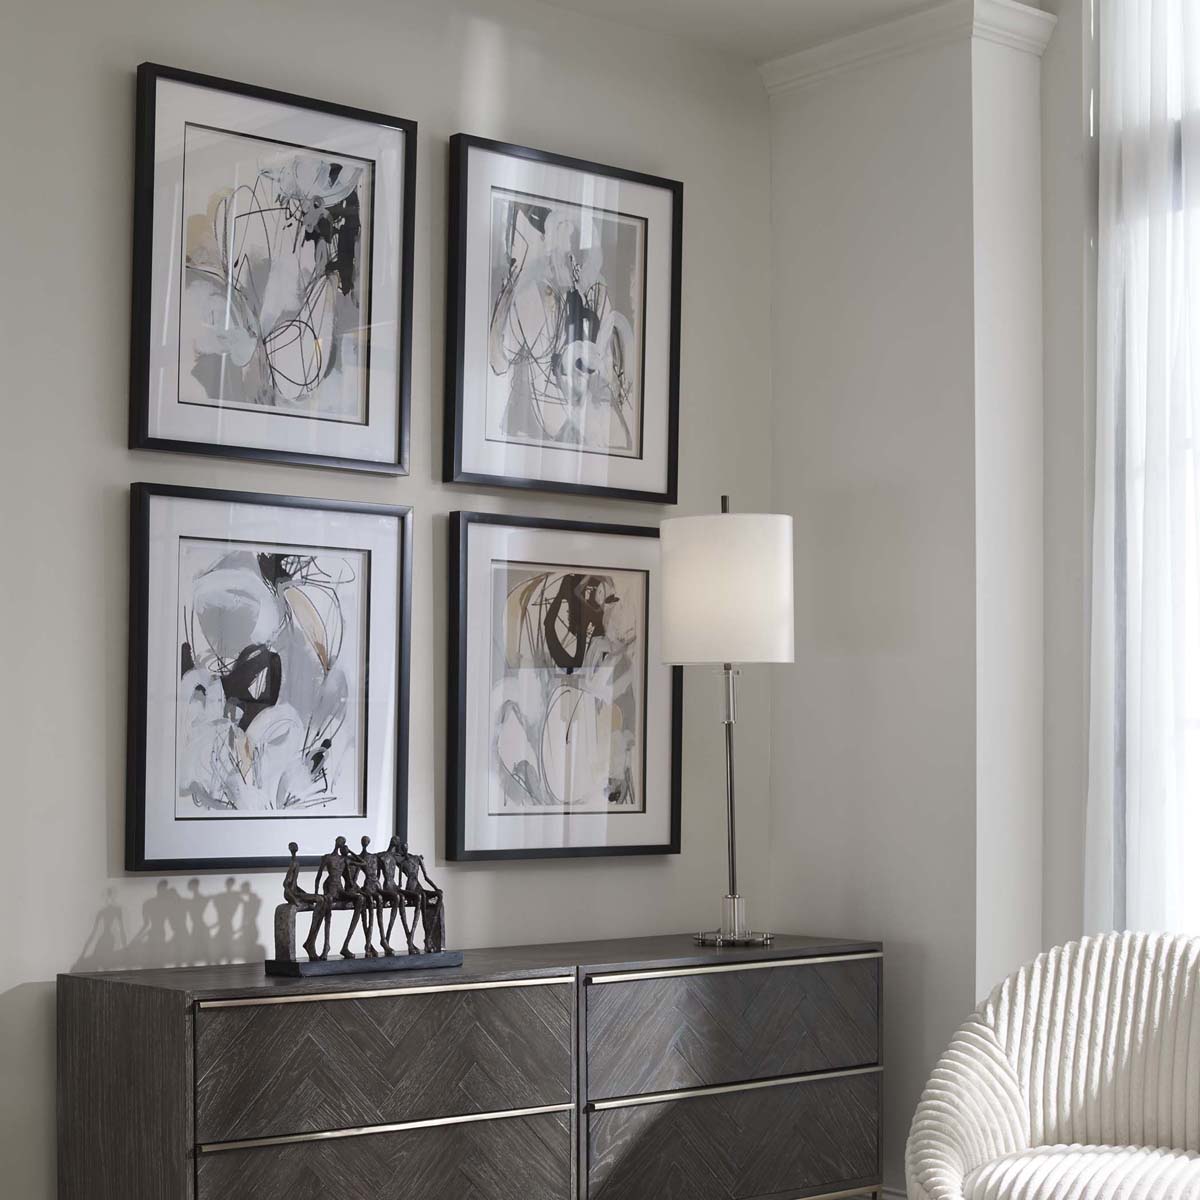 Uttermost Tangled Threads Abstract Framed Prints, S/4